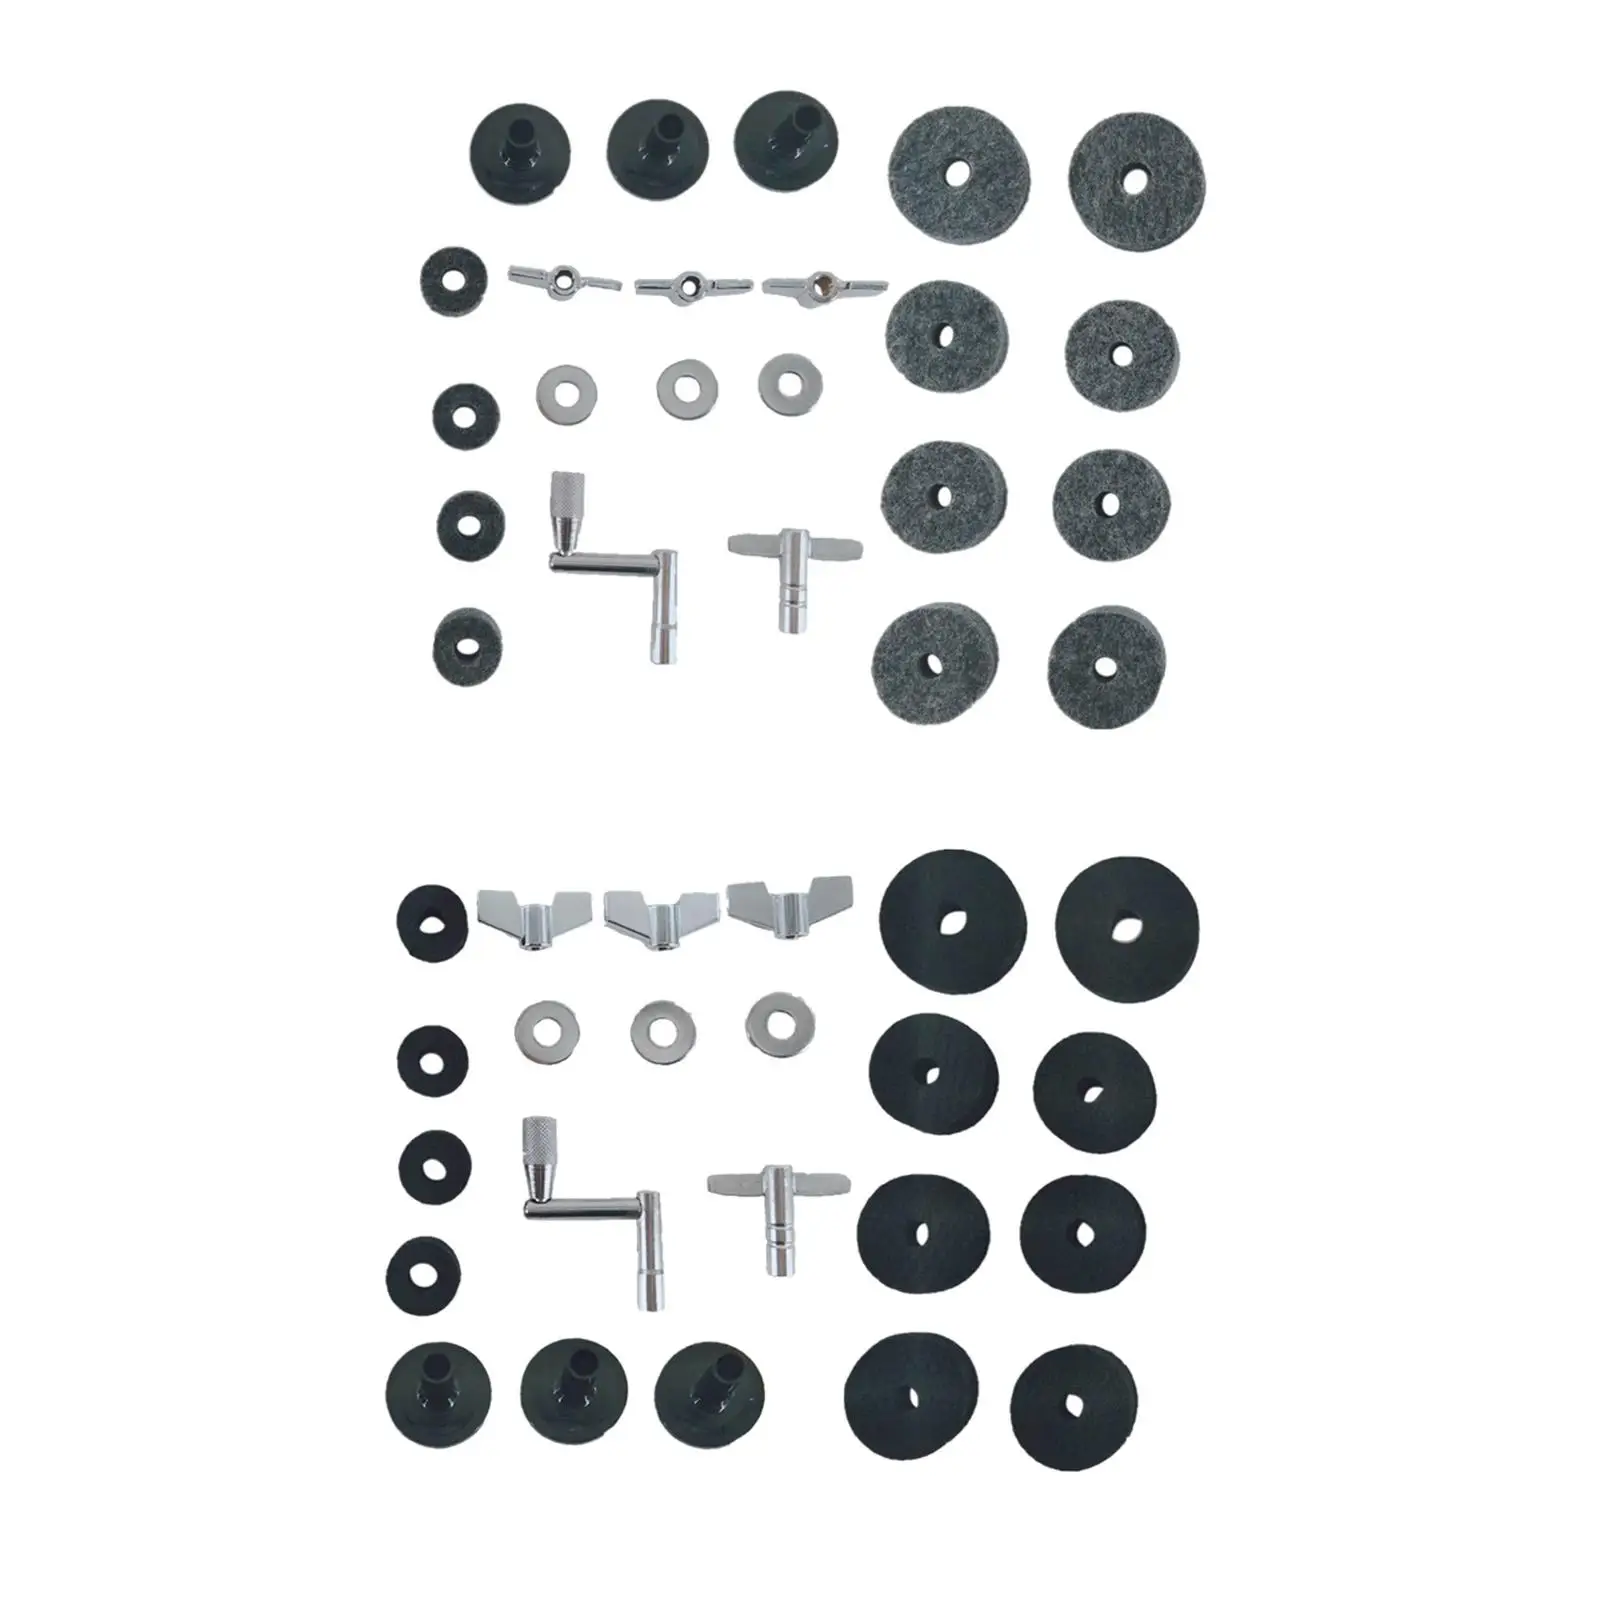 23 Pieces Replacement Cymbal Felt Washer Cymbal Replacement Cymbal Washer Drum Accessories Attachment Drum Sets Replacement